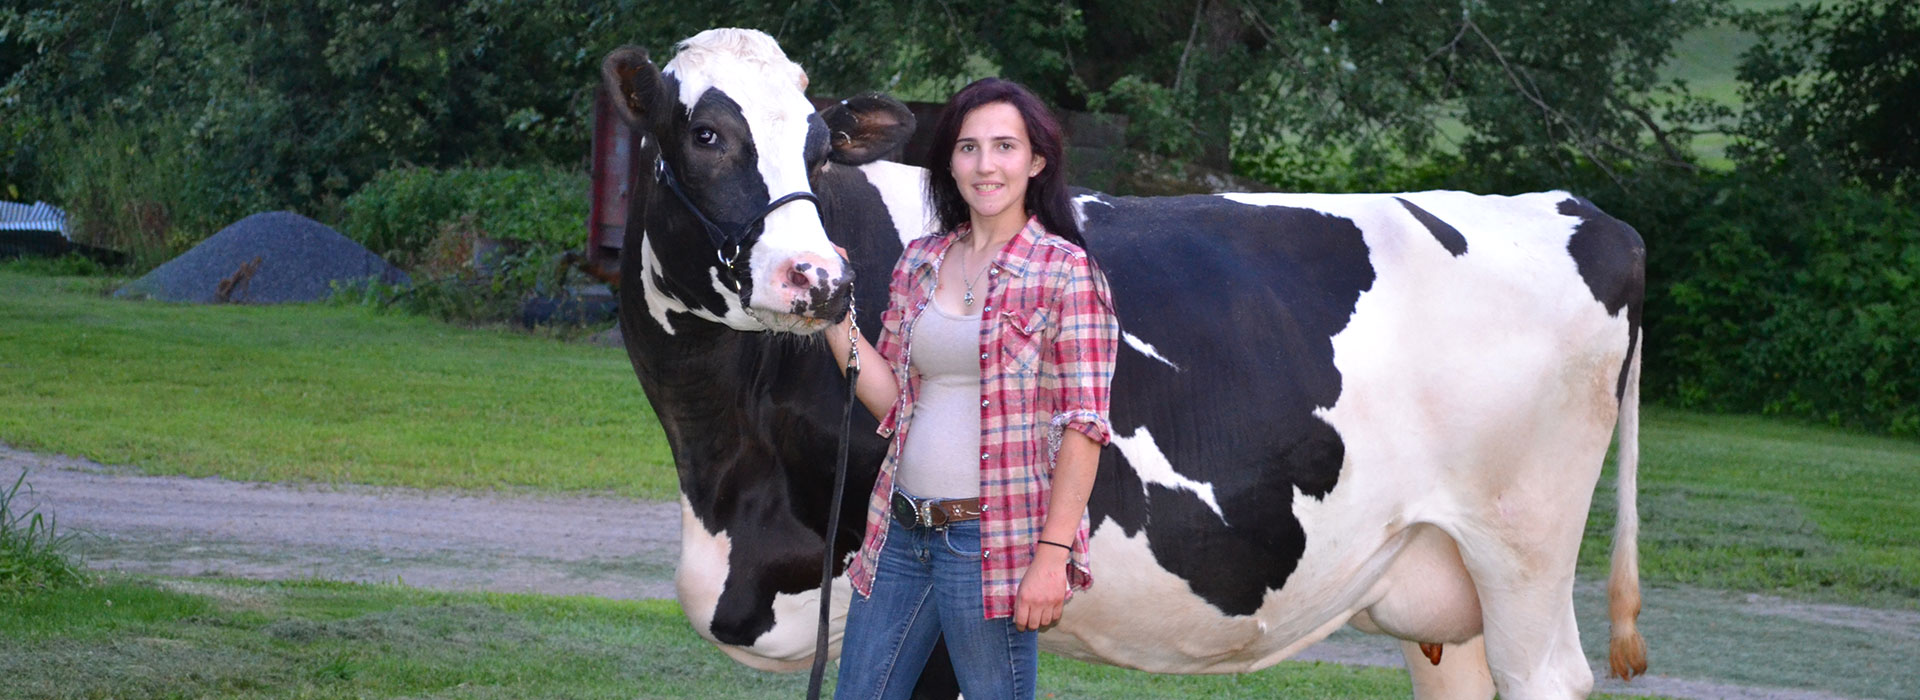 Carrie Shuman with a cow